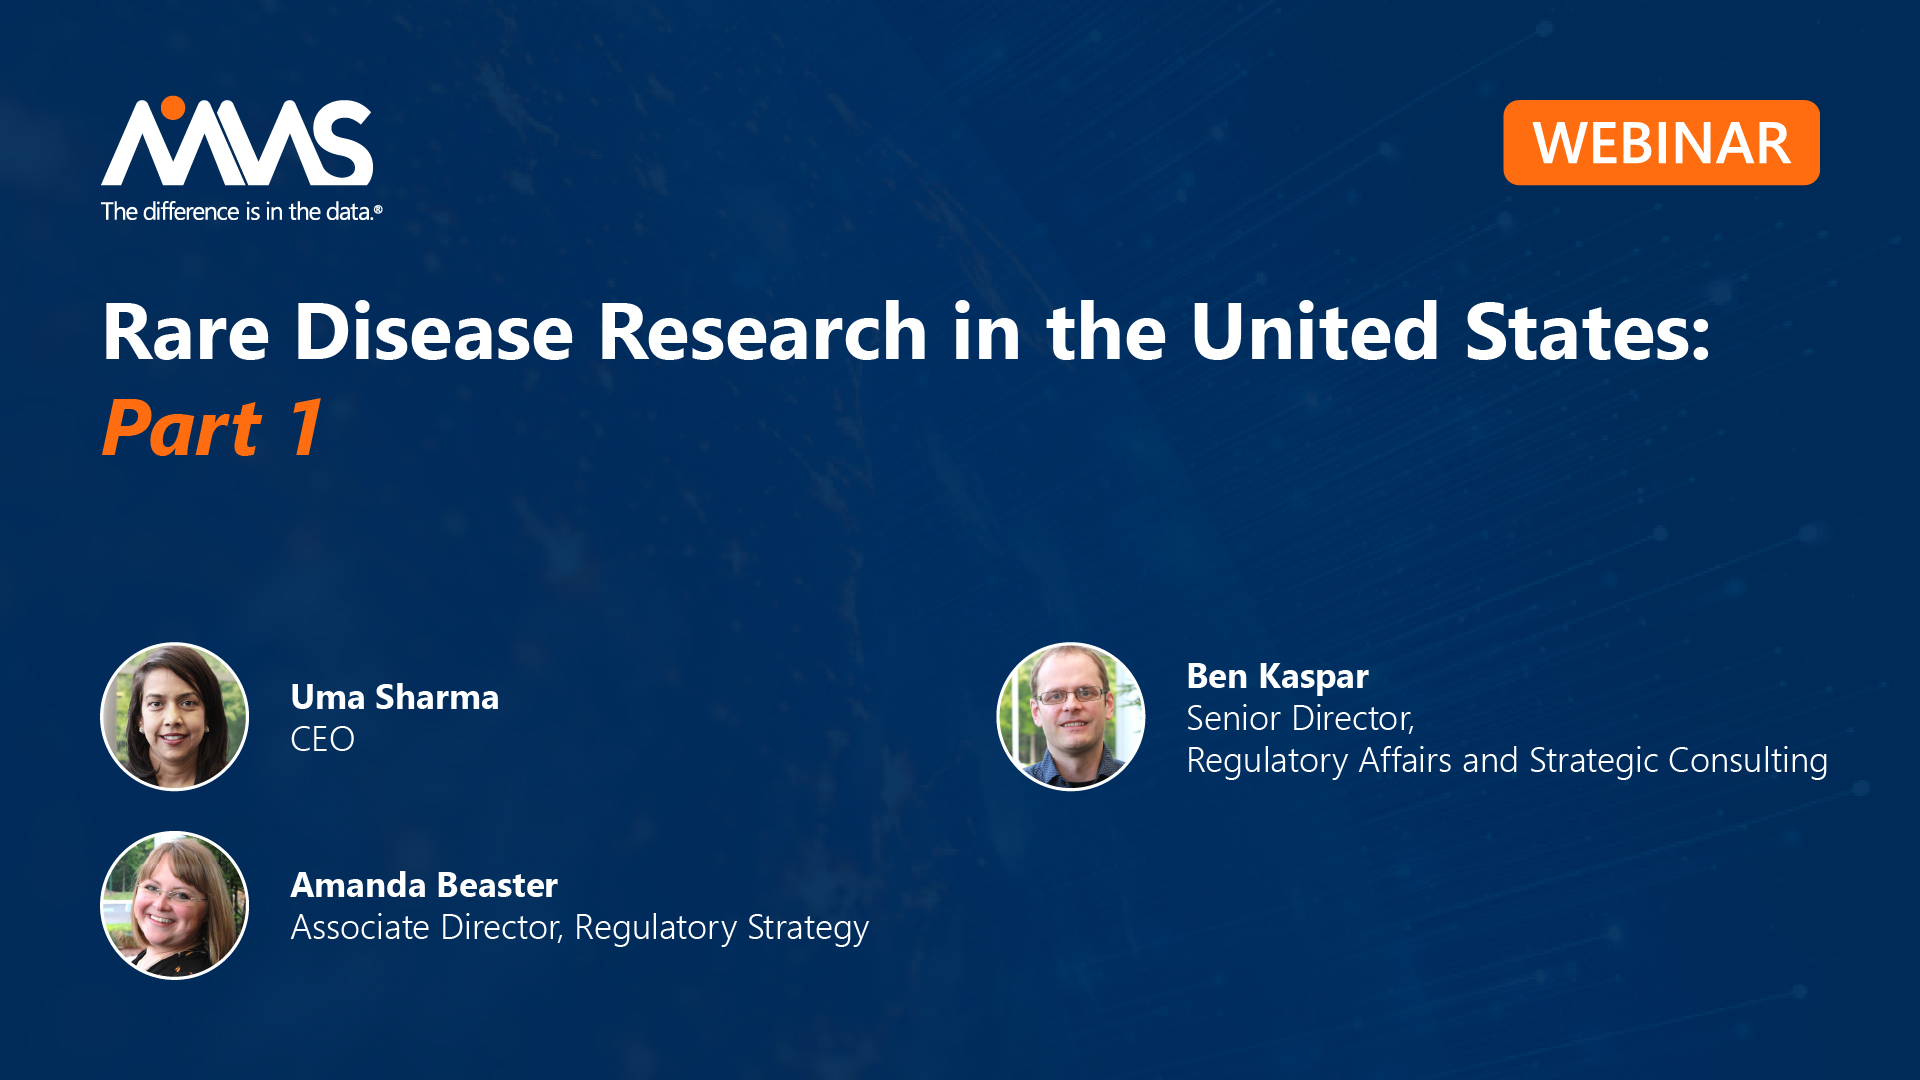 Rare Disease Research in the United States, Part 1